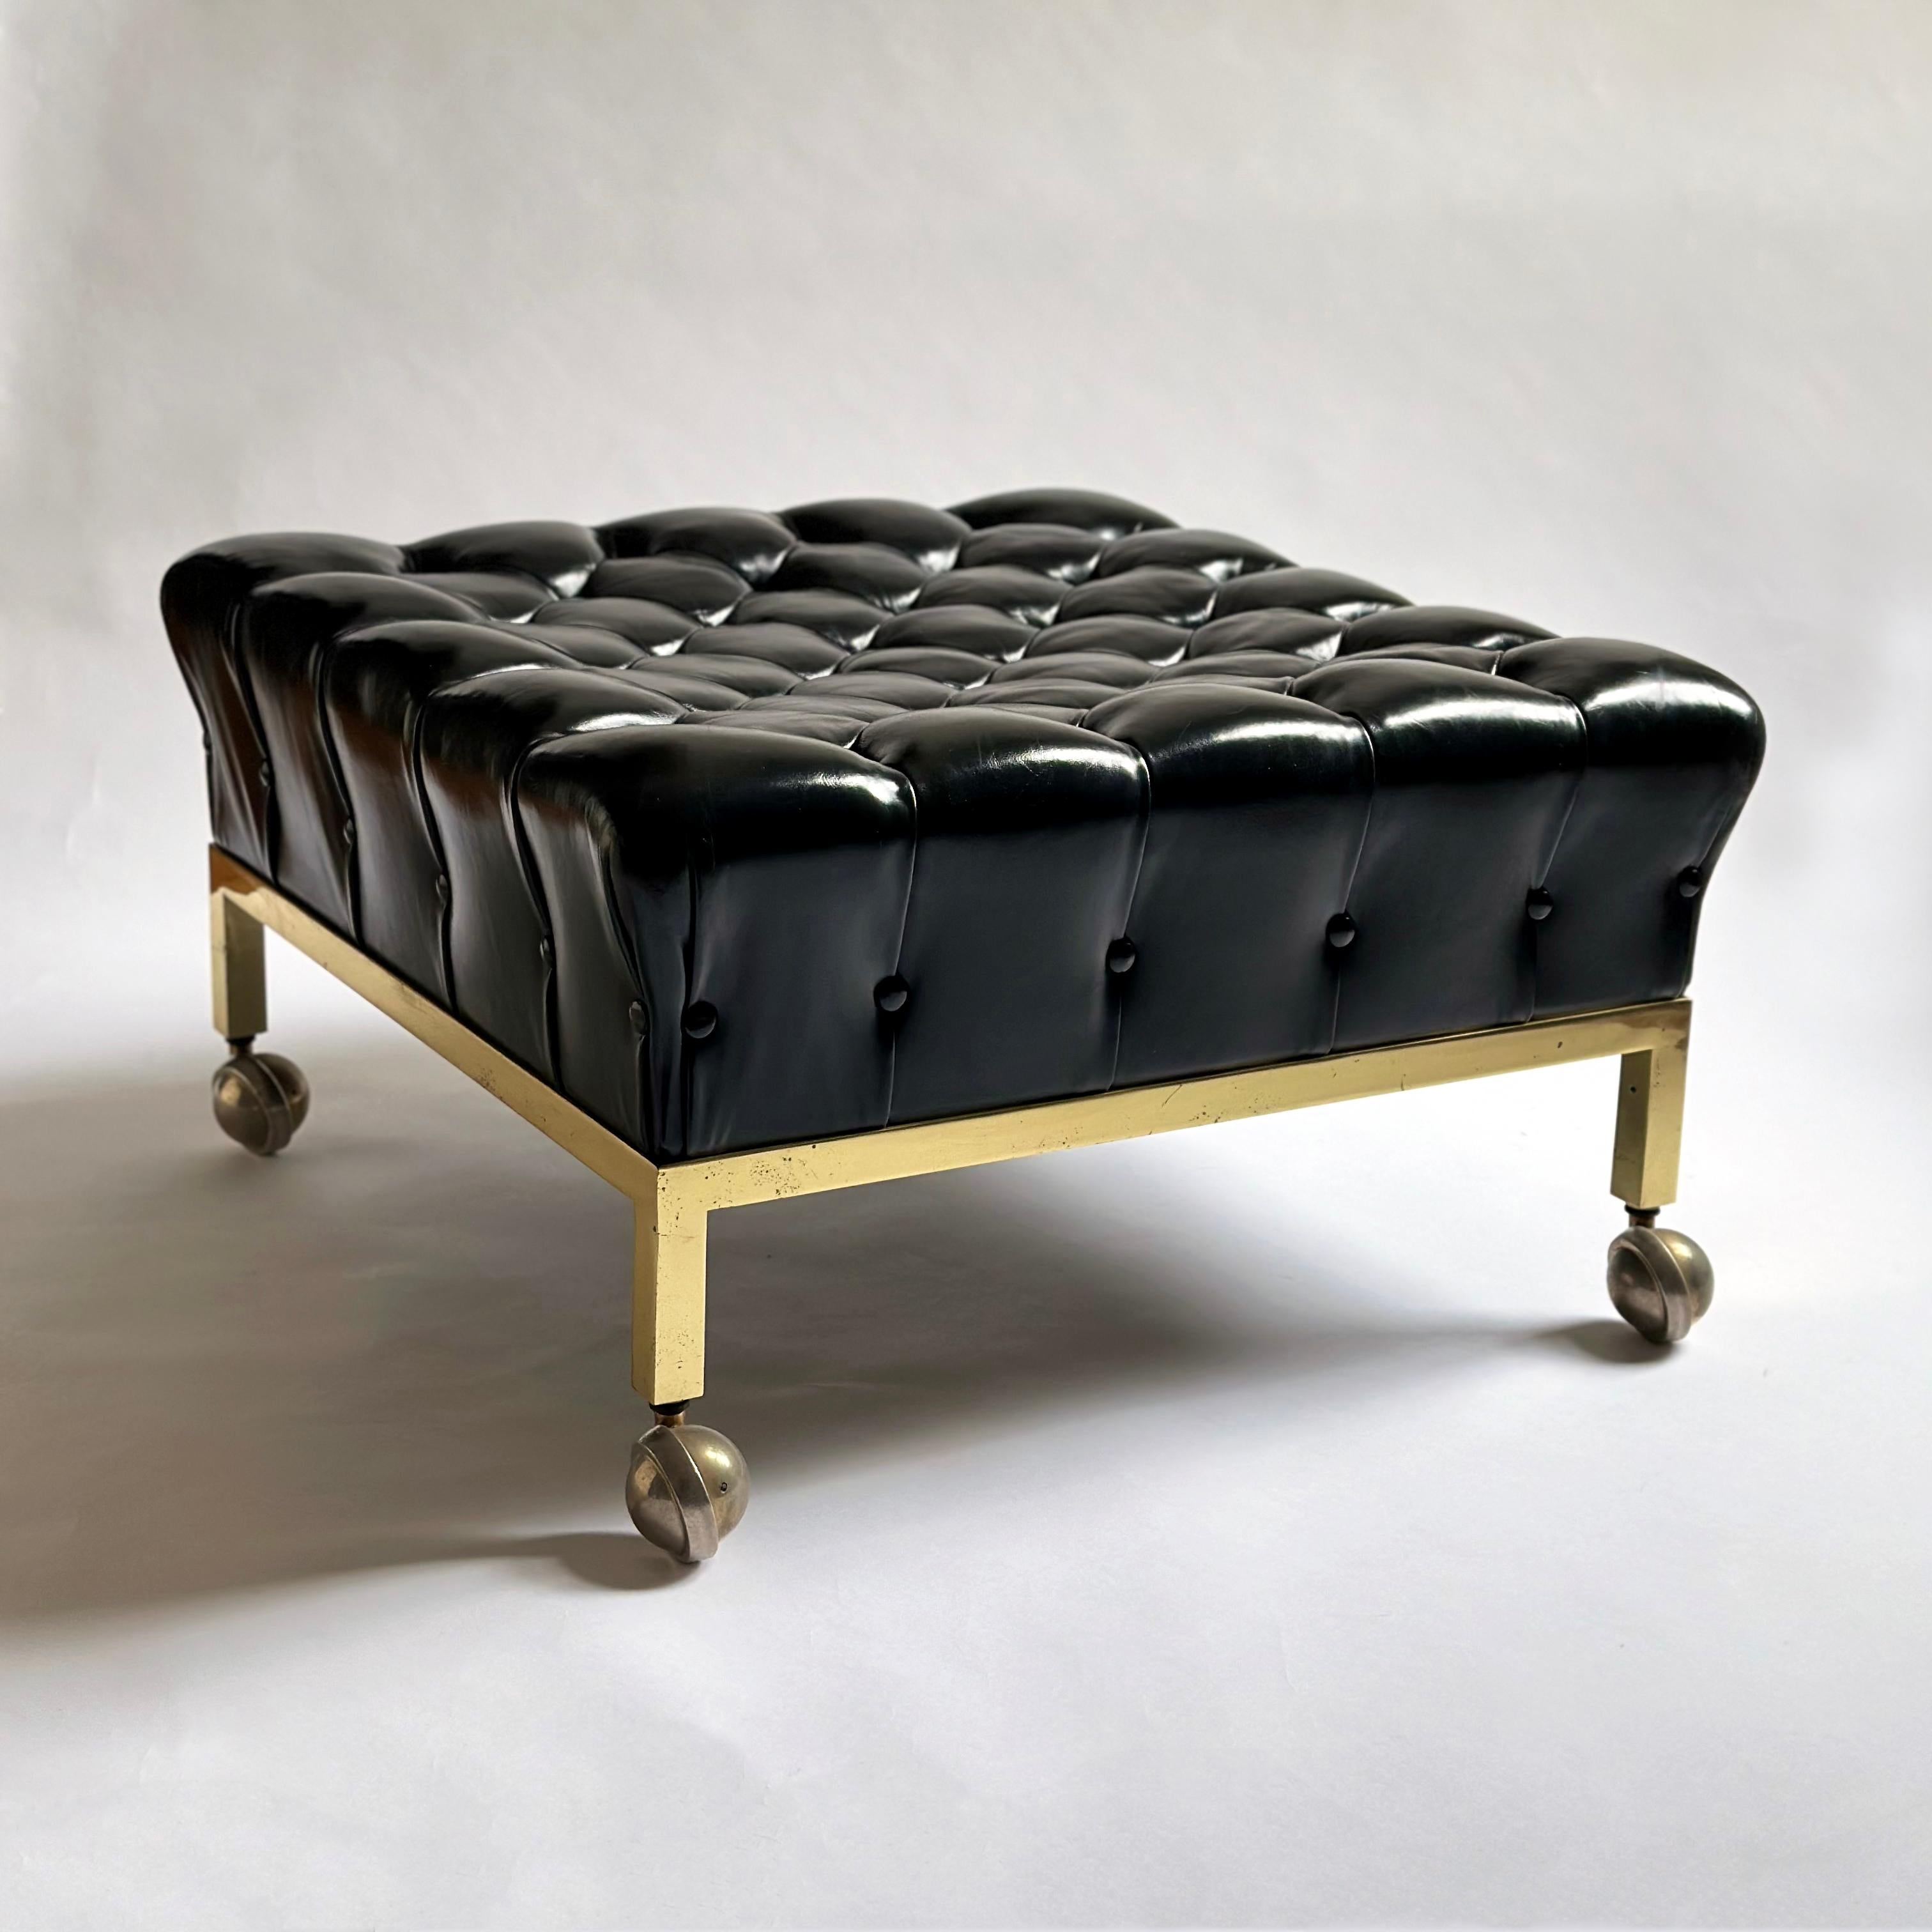 American Brass Framed Biscuit Tufted Ottoman in Original Black Leather by Harvey Probber For Sale